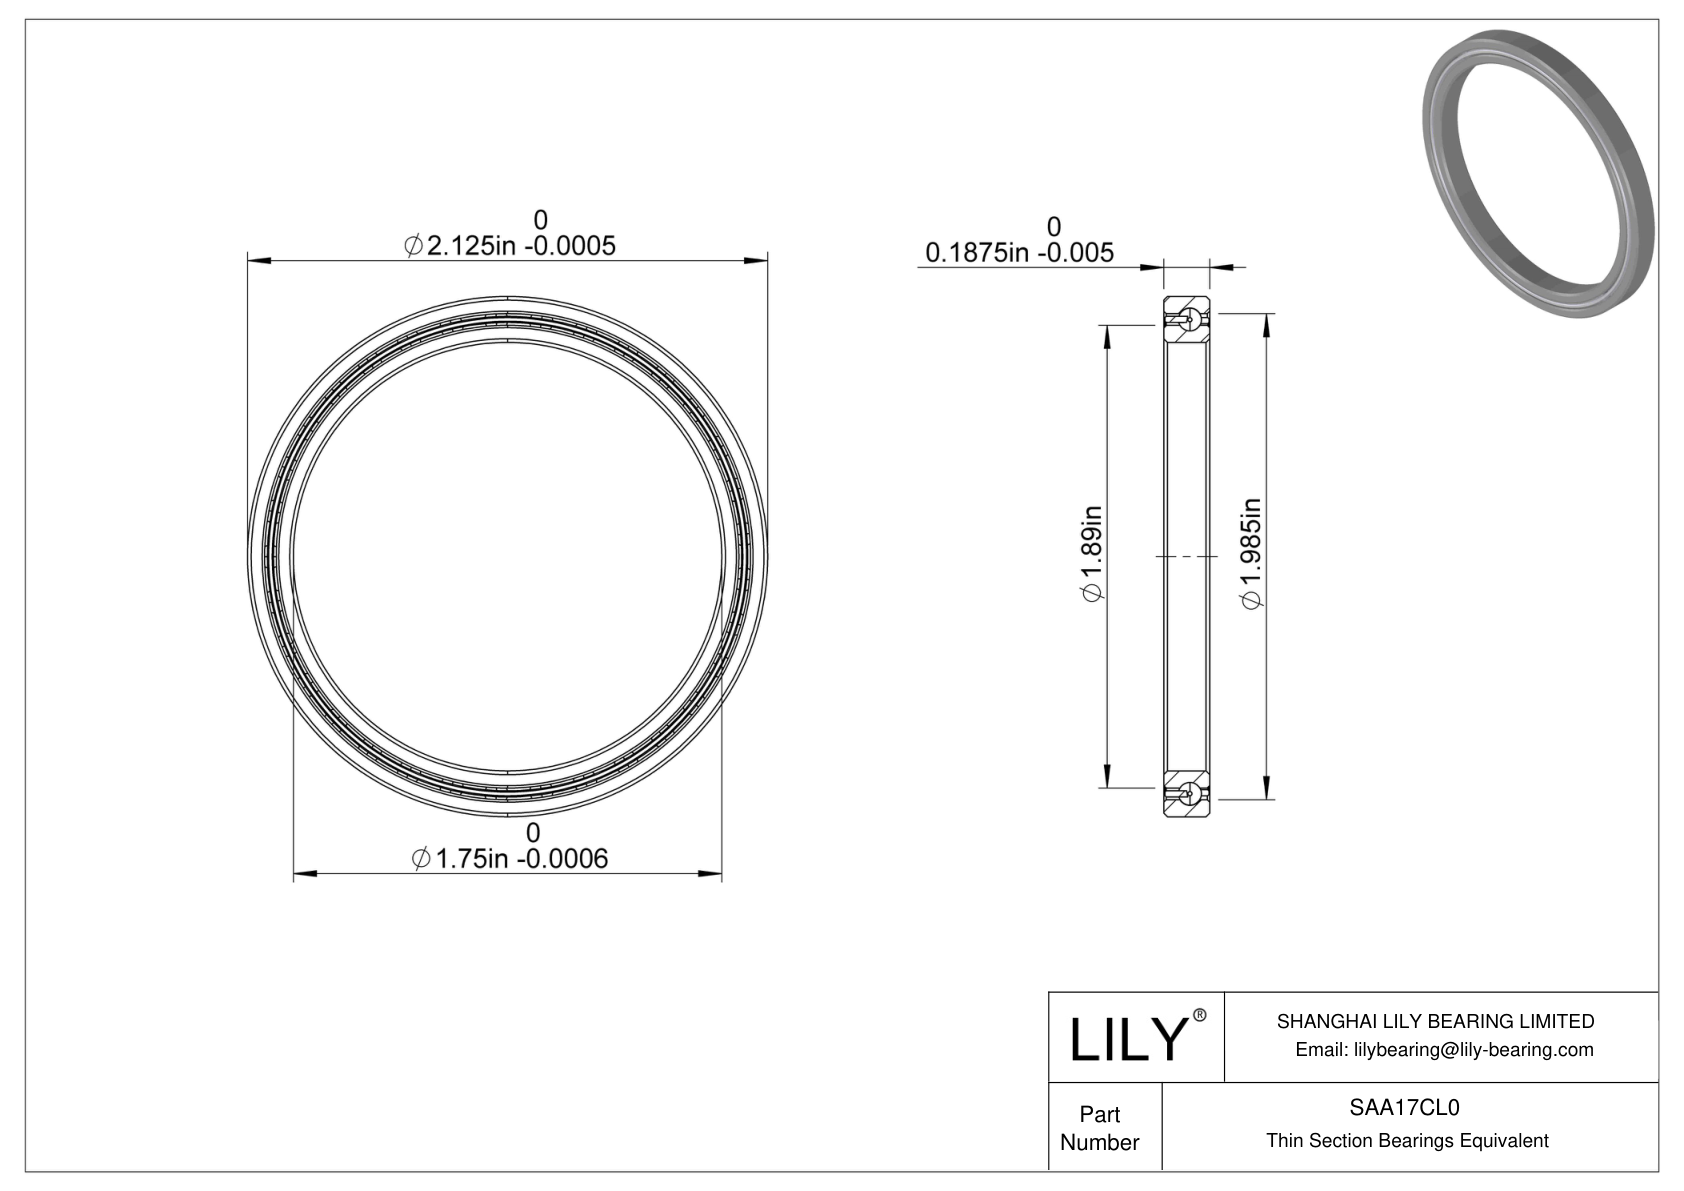 SAA17CL0 Constant Section (CS) Bearings cad drawing